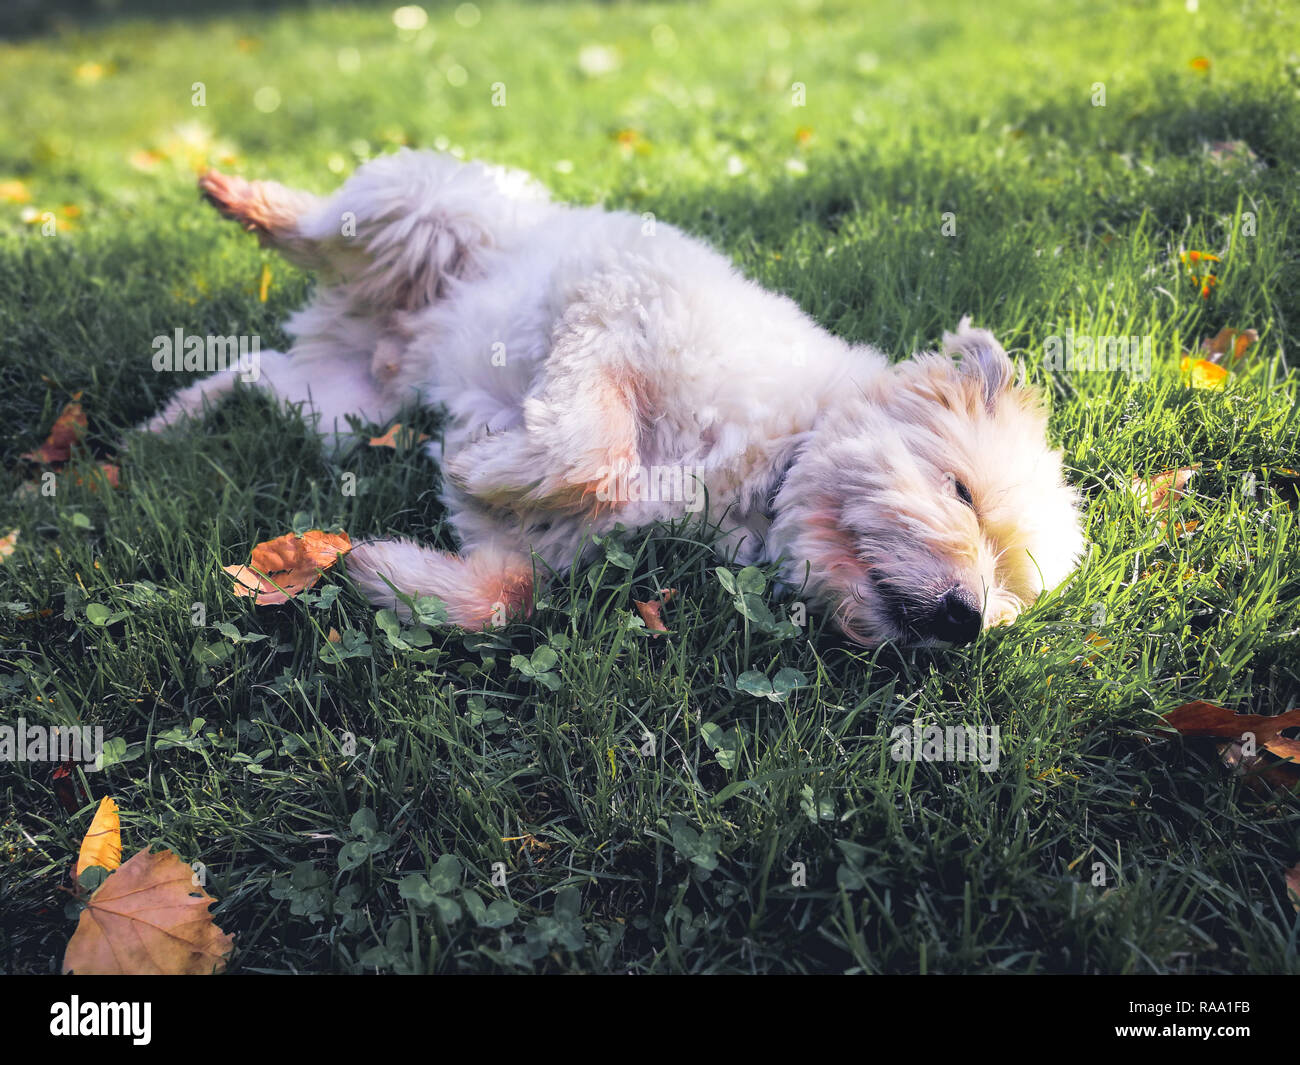 Cute sweet furry dog lying on a grass in a city park Stock Photo